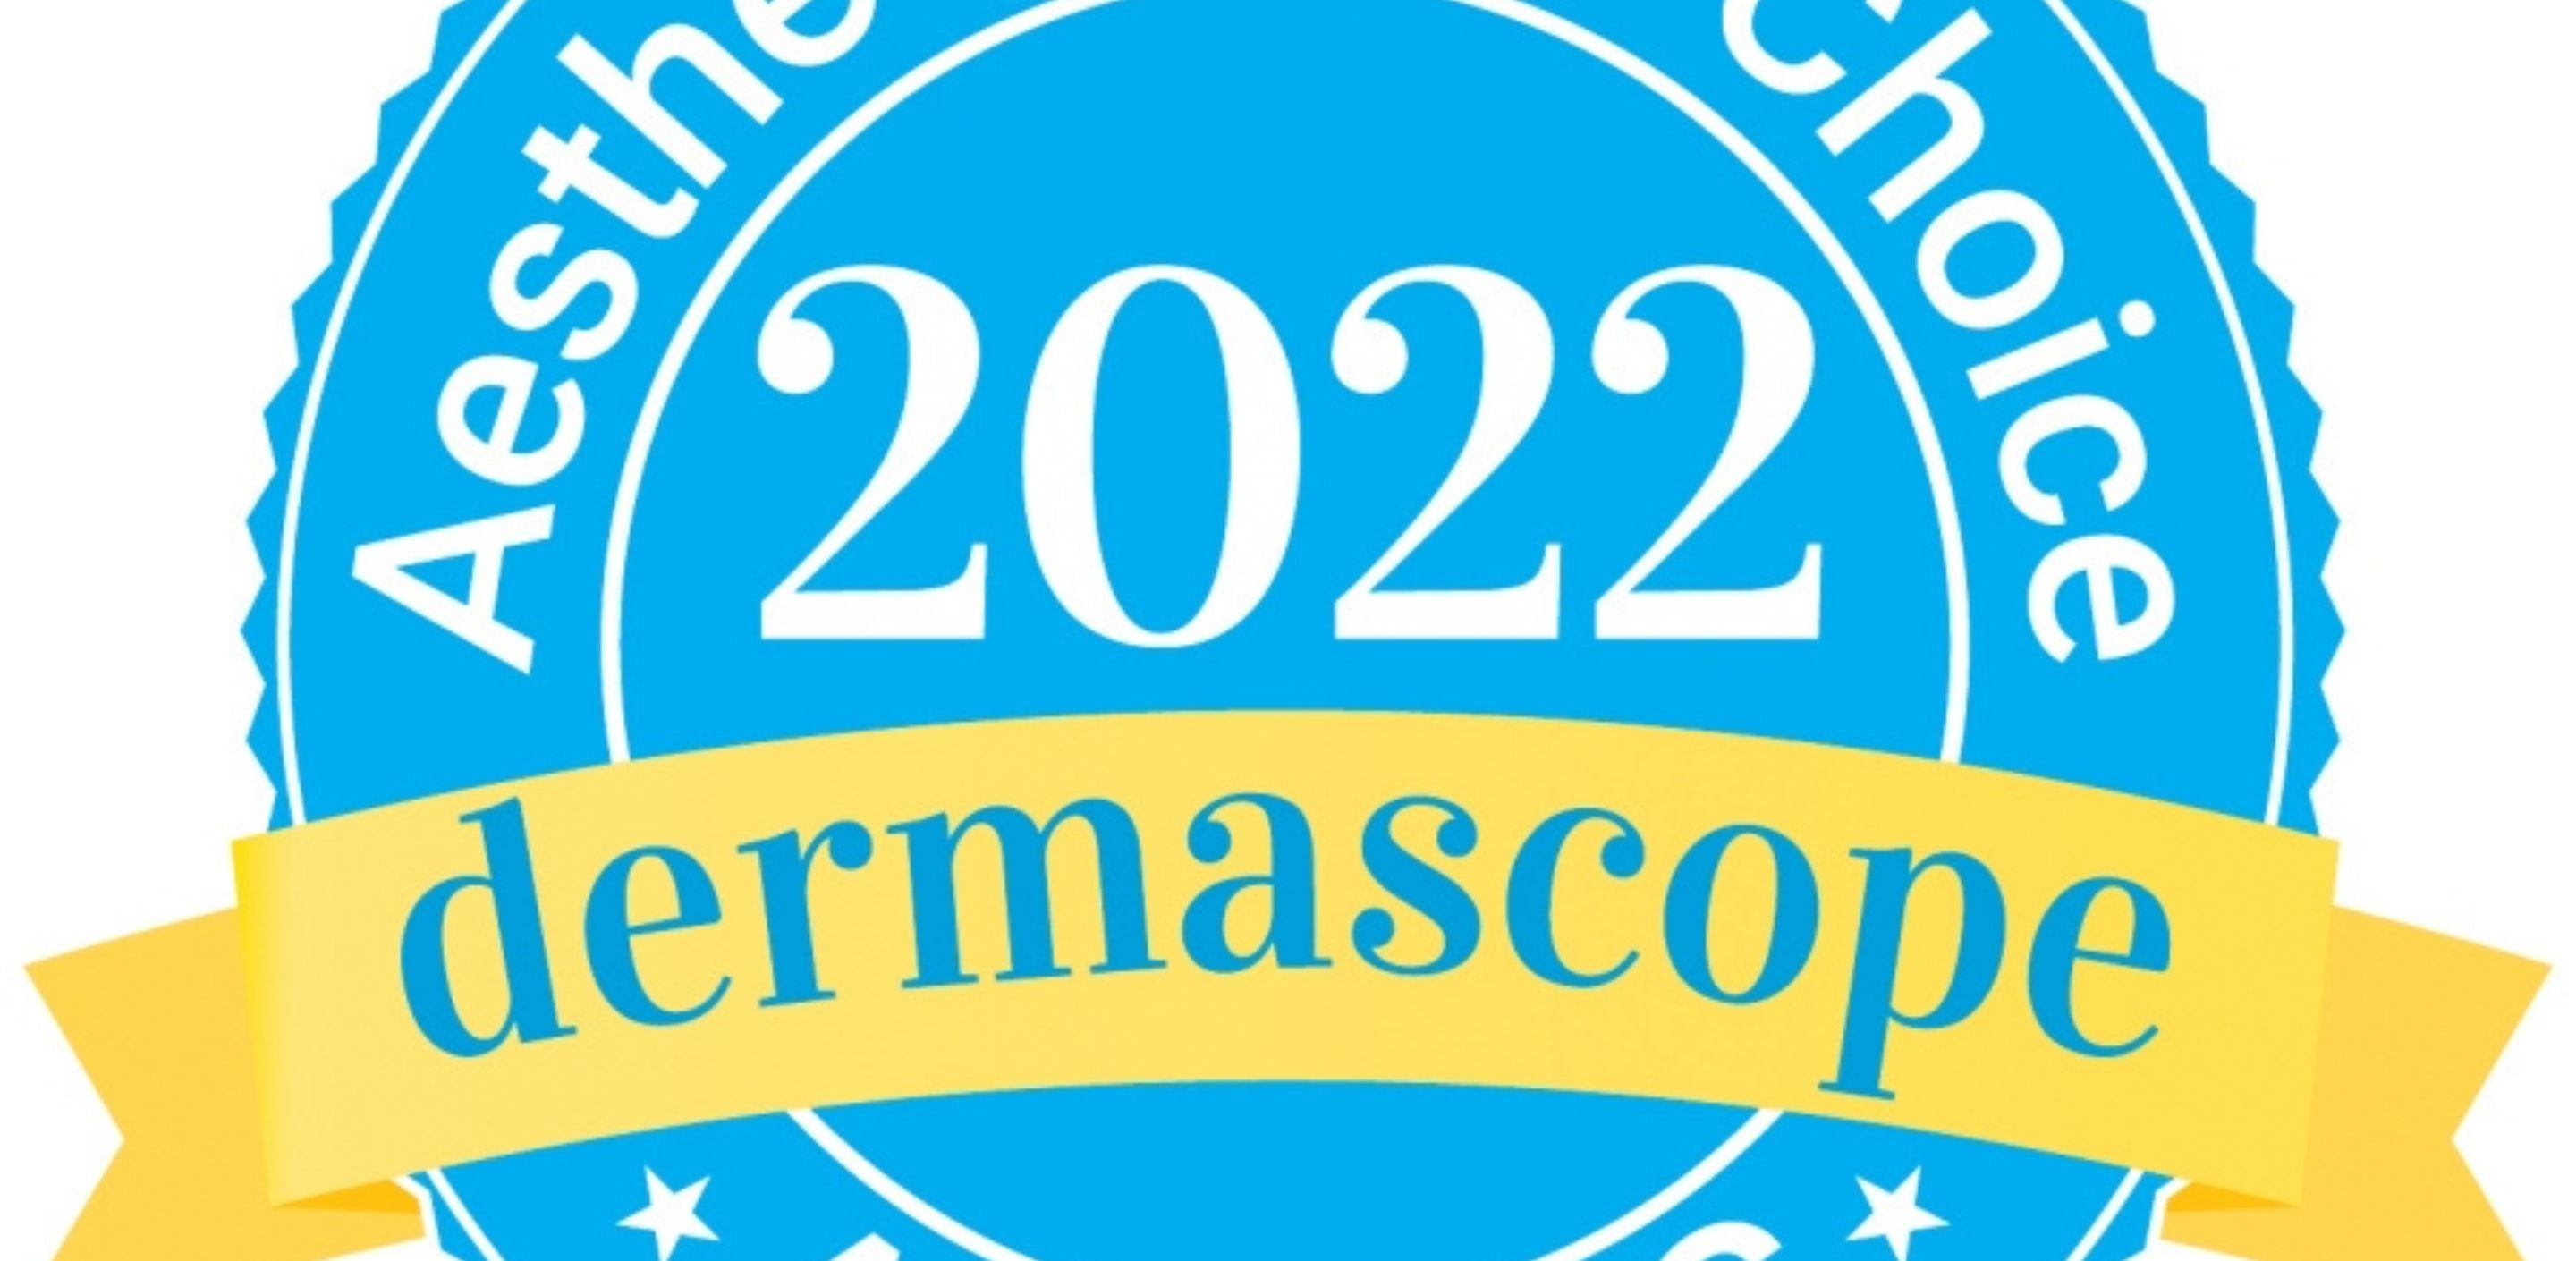 Vote for Your Faves in the 2022 Dermascope Awards! The Wax Connection